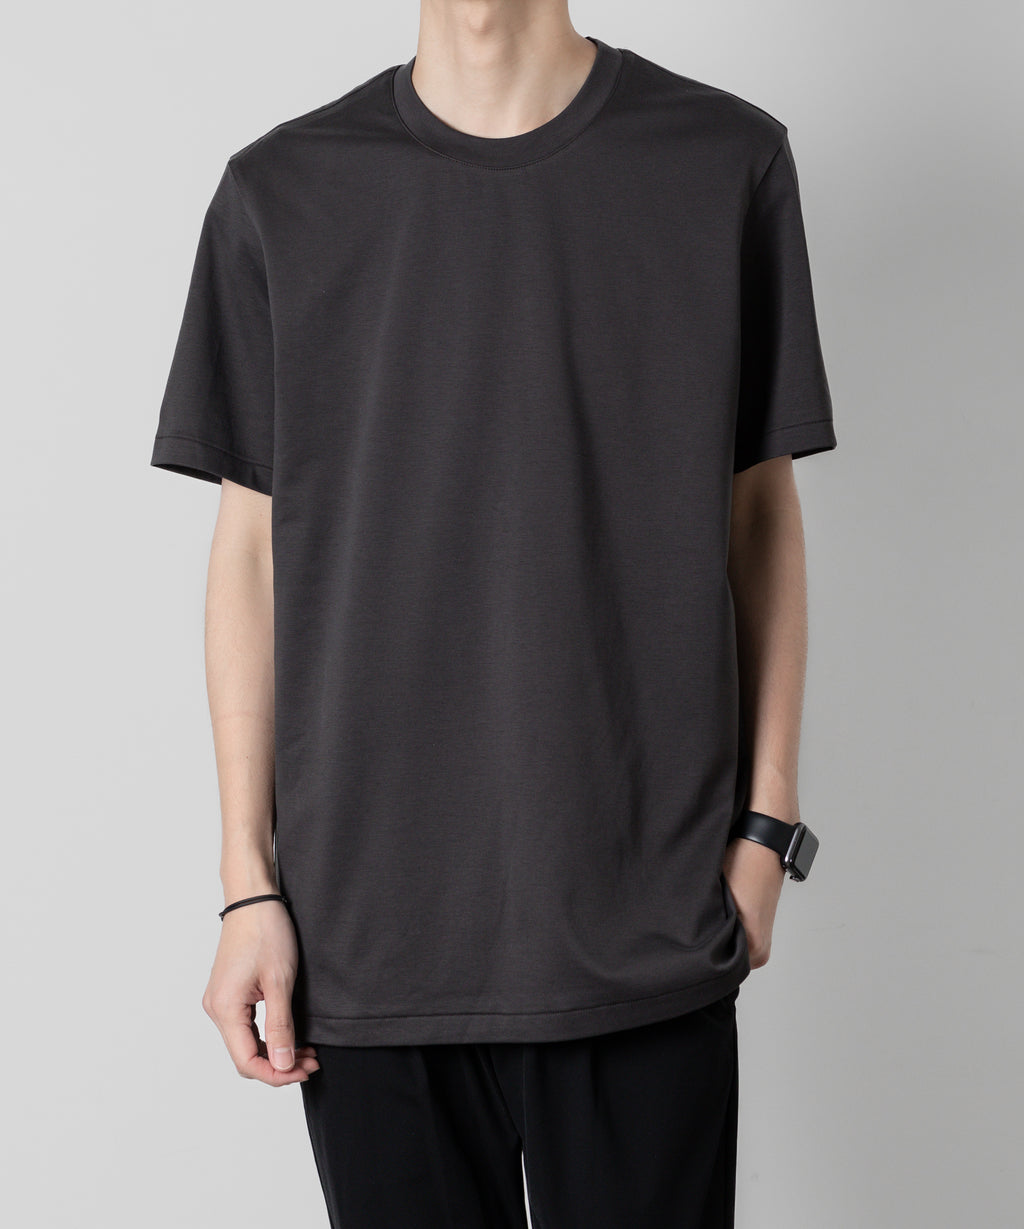 【ATTACHMENT】ATTACHMENT アタッチメントのCOTTON DOUBLE FACE SLIM FIT S/S TEE - D.GRAY 公式通販サイトsession福岡セレクトショップ